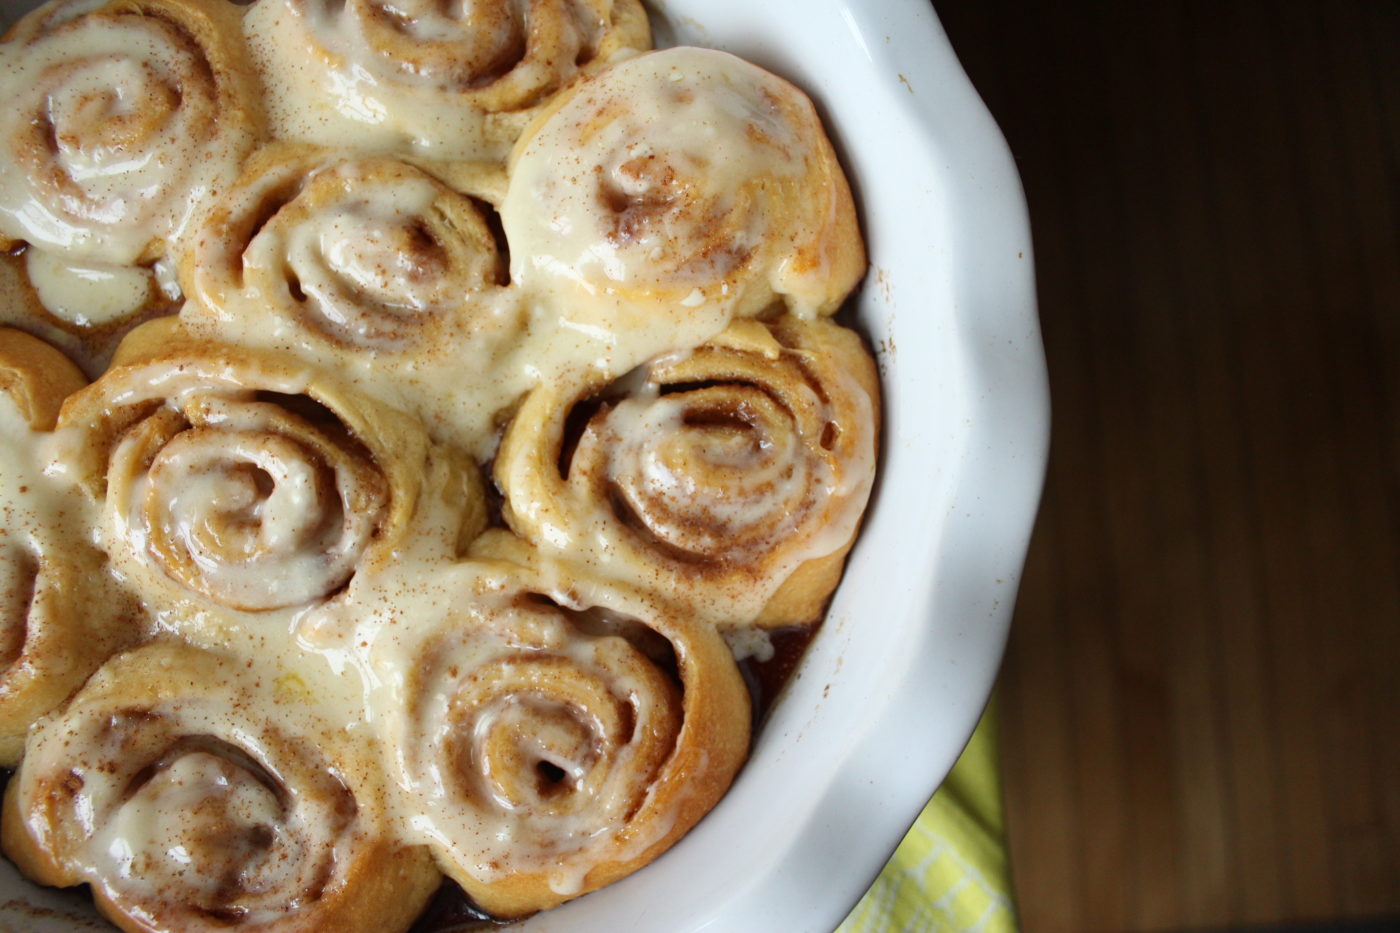 The simplest recipe for cinnamon rolls.